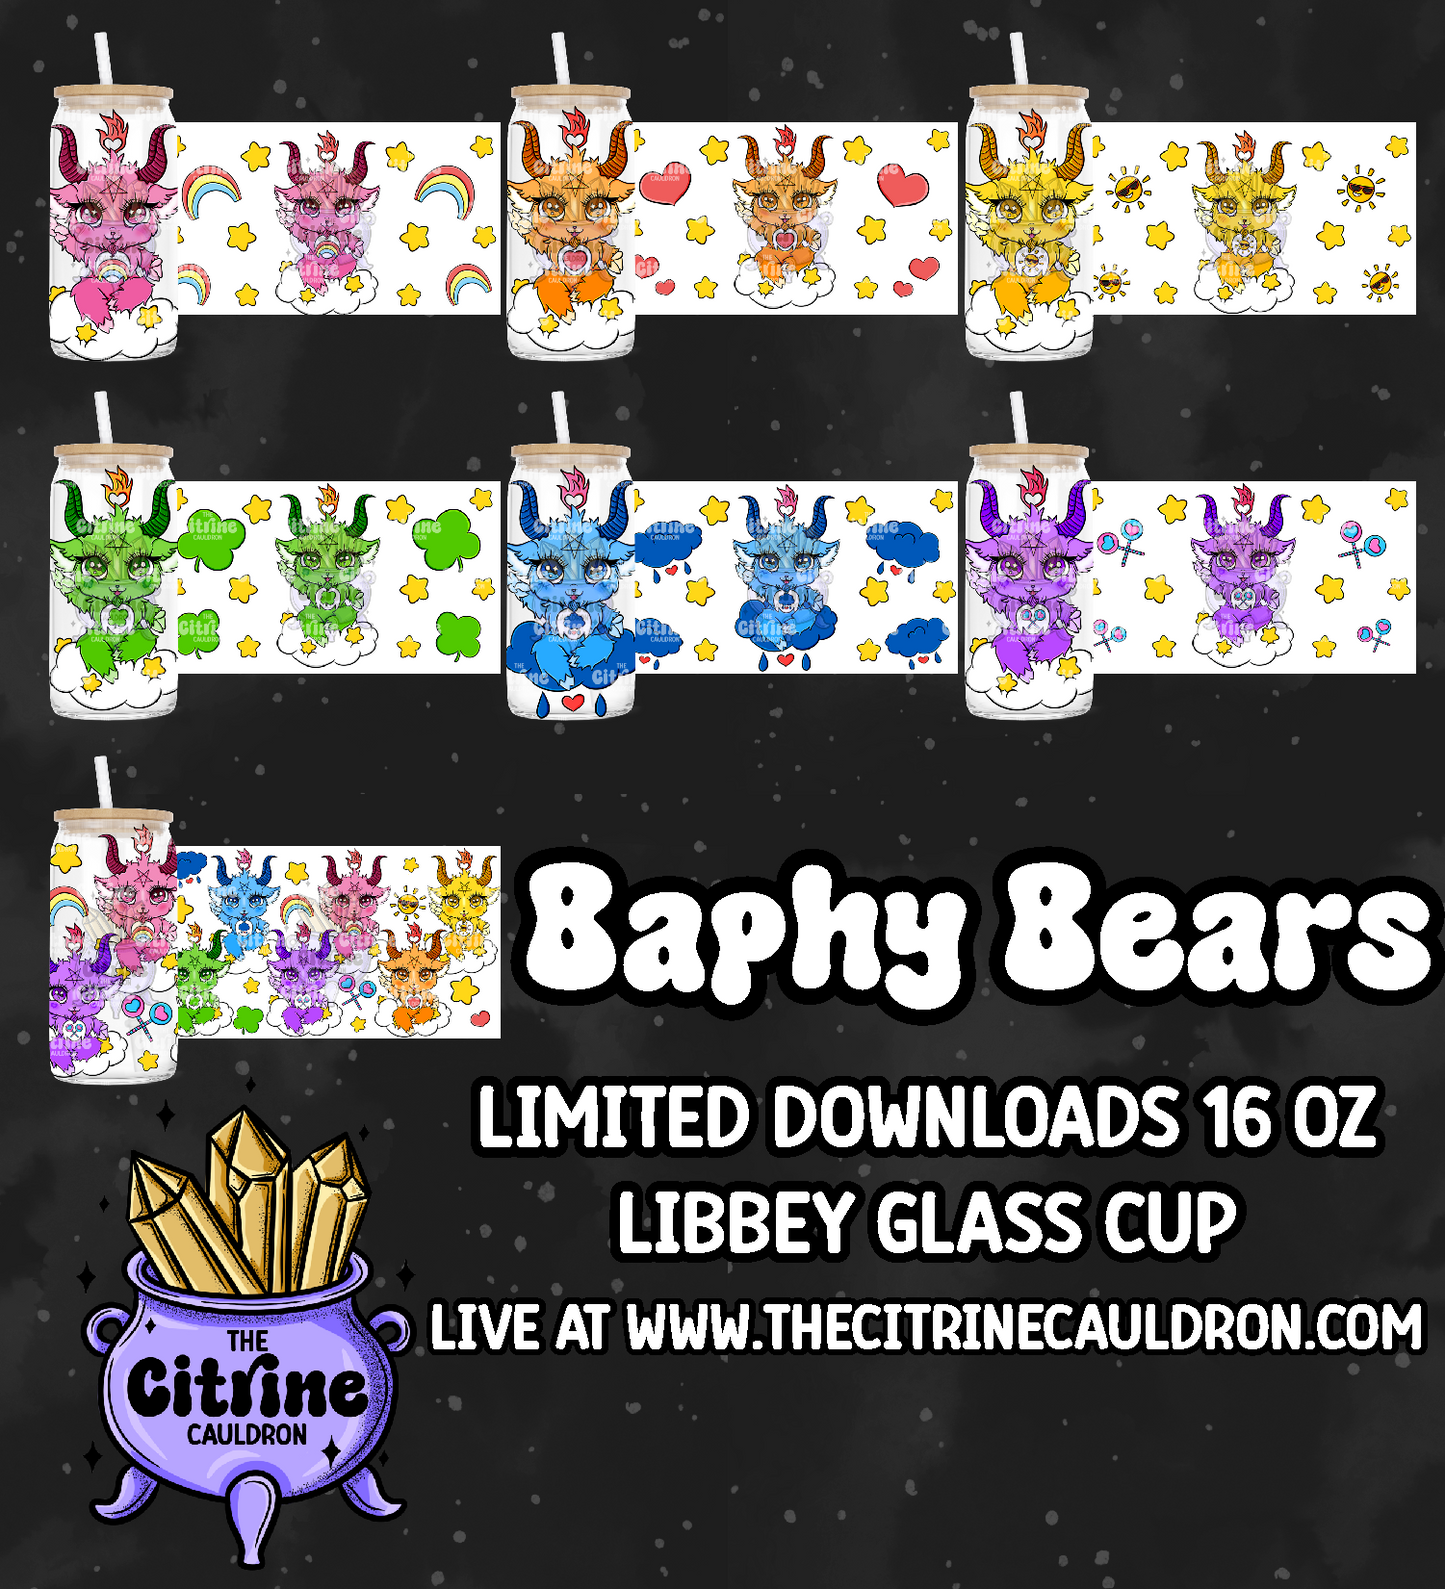 Baphy Bears Care - PNG Wrap for Libbey 16oz Glass Can